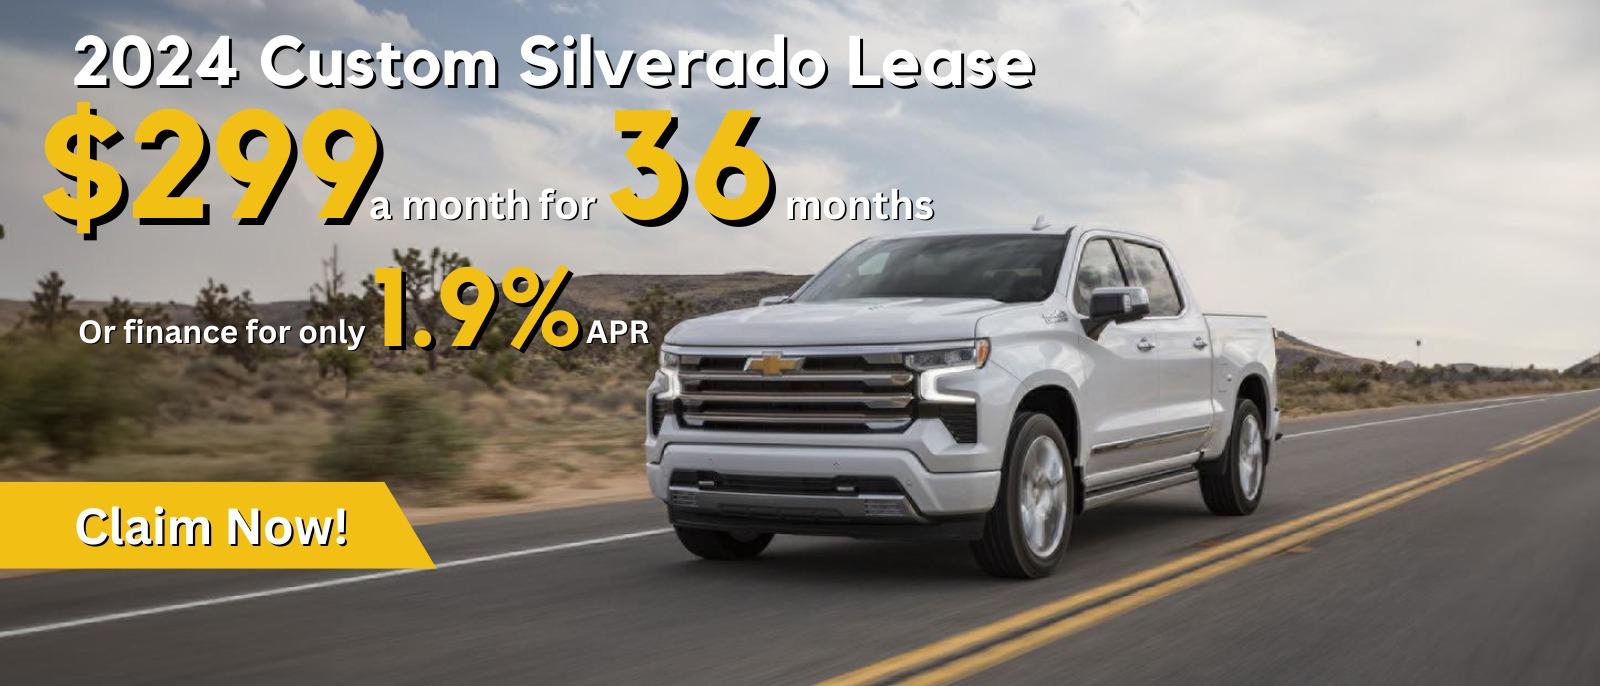 2024 custom silverado lease 
$299 a month for 36 months 
or finance for only 1.9% APR